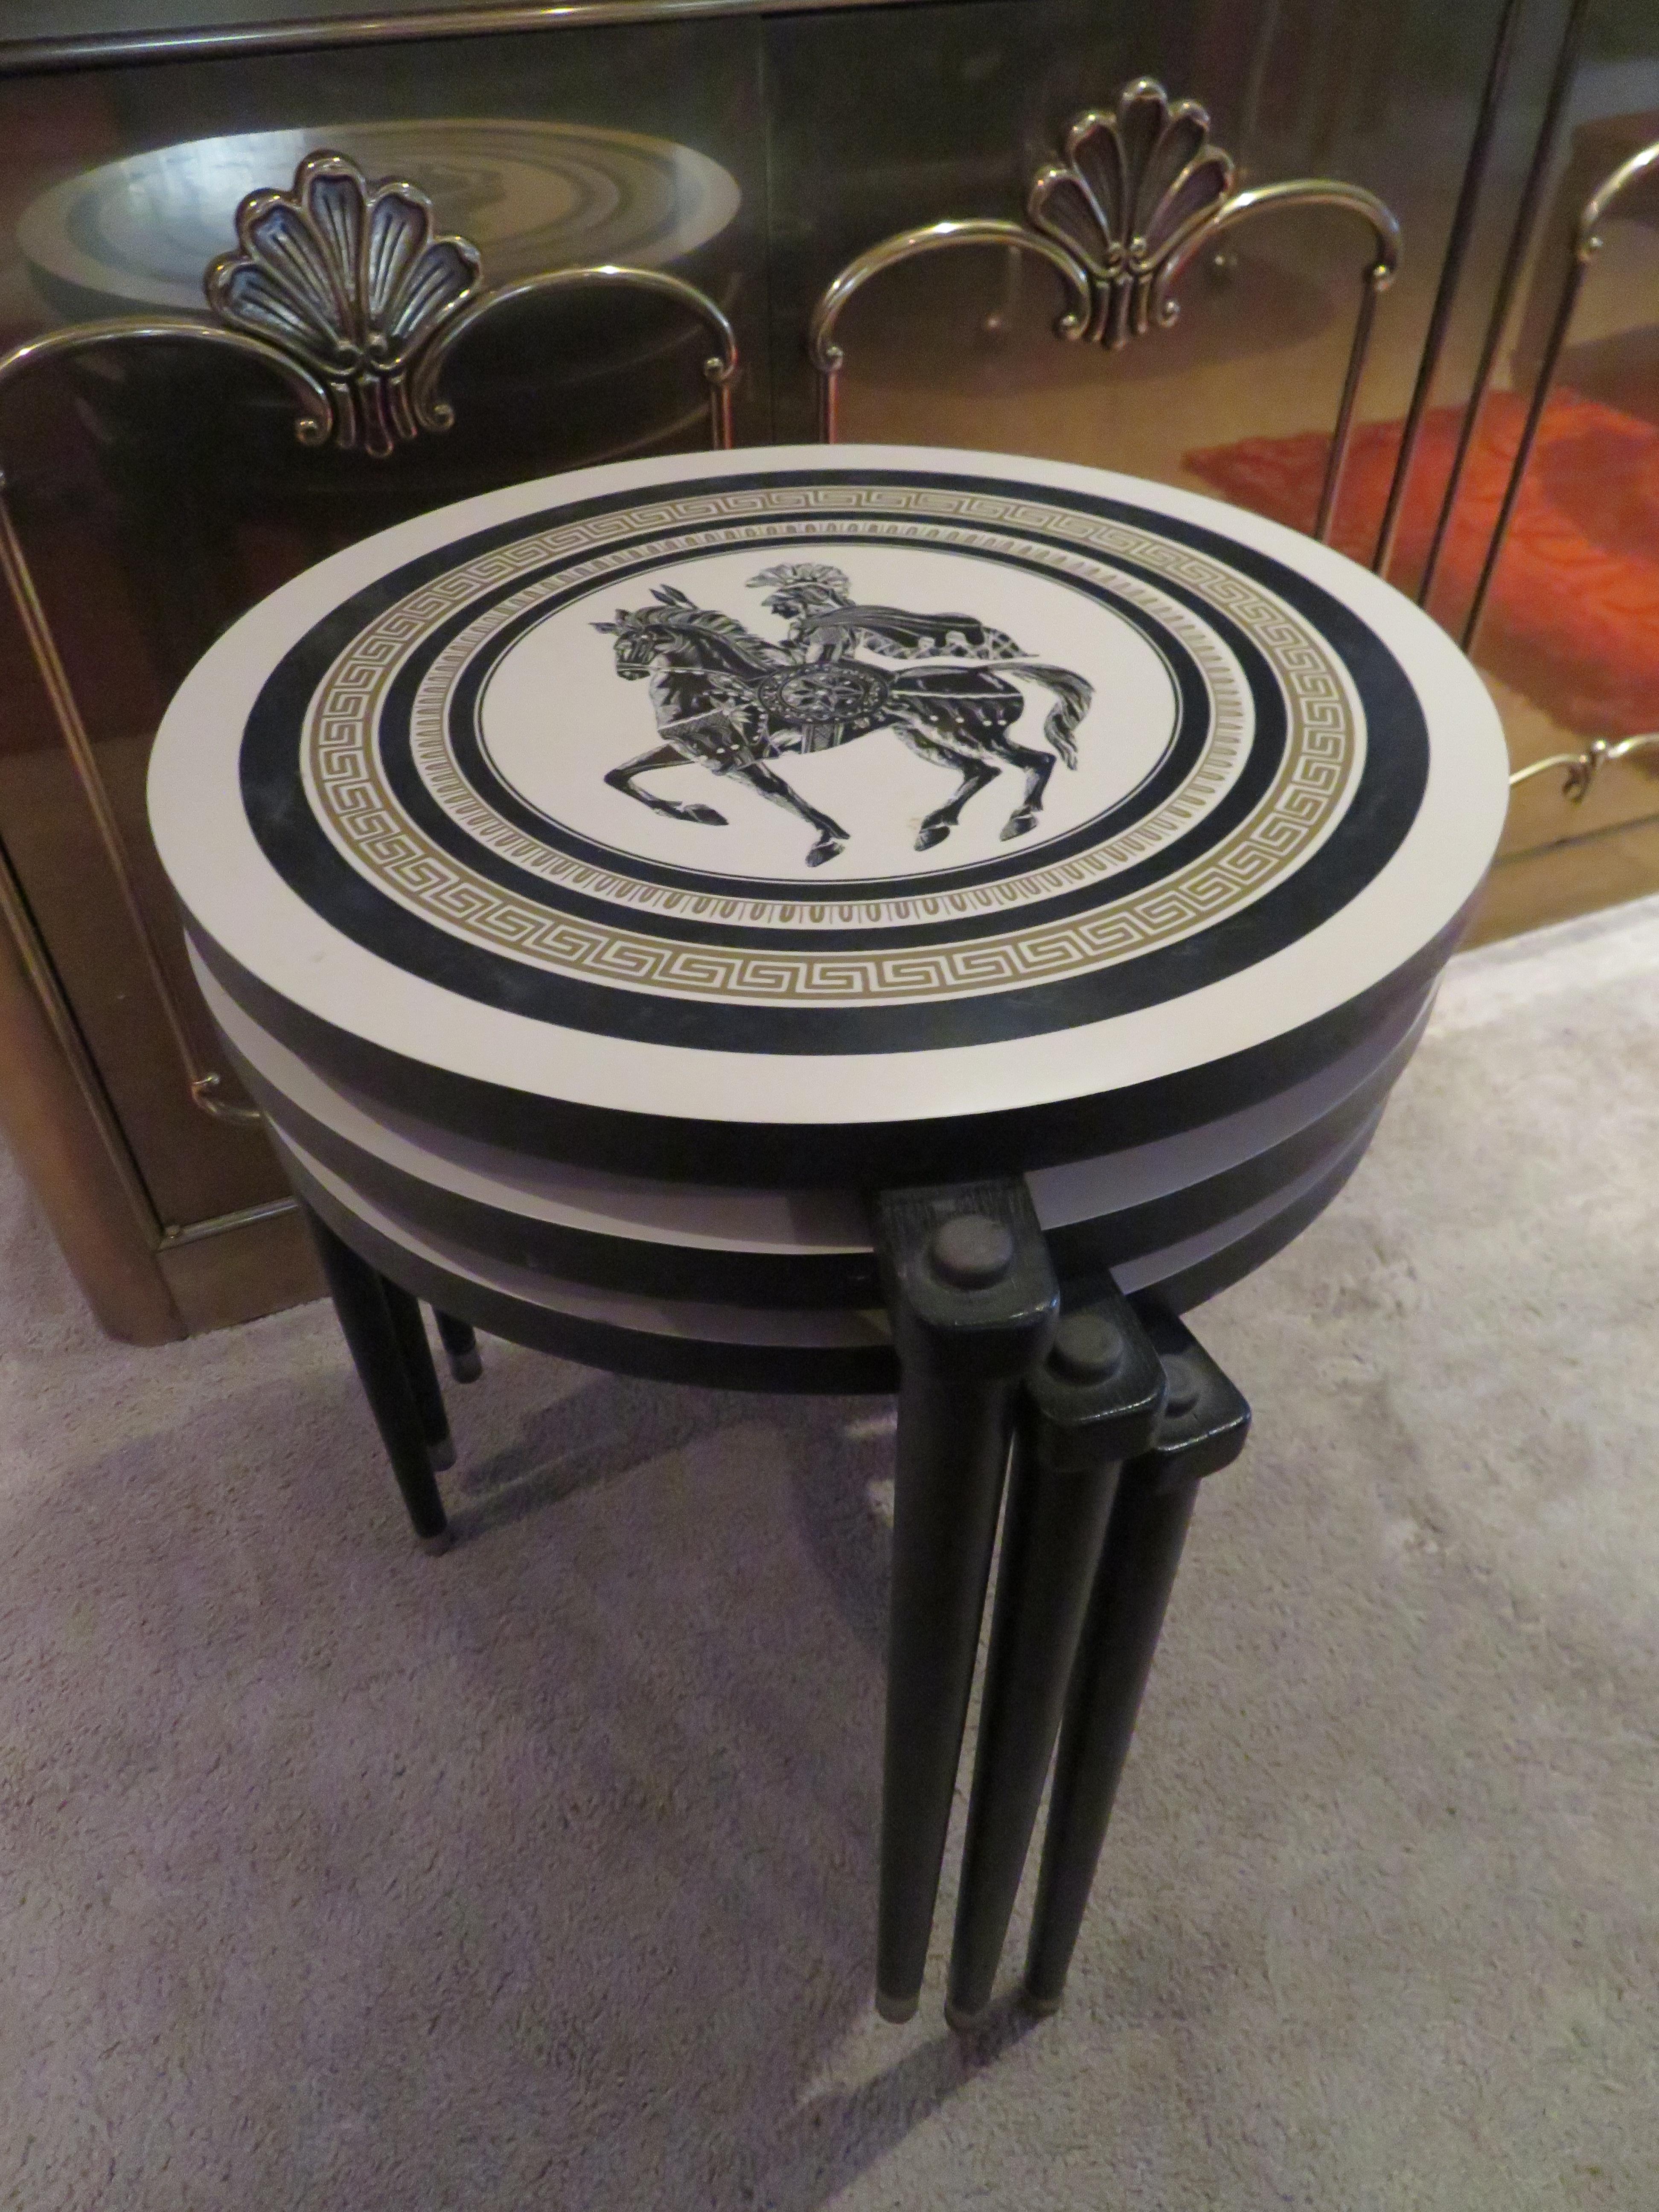 Charming Set of 3 Piero Fornasetti Style Stack Nesting Table Mid-Century Modern For Sale 2